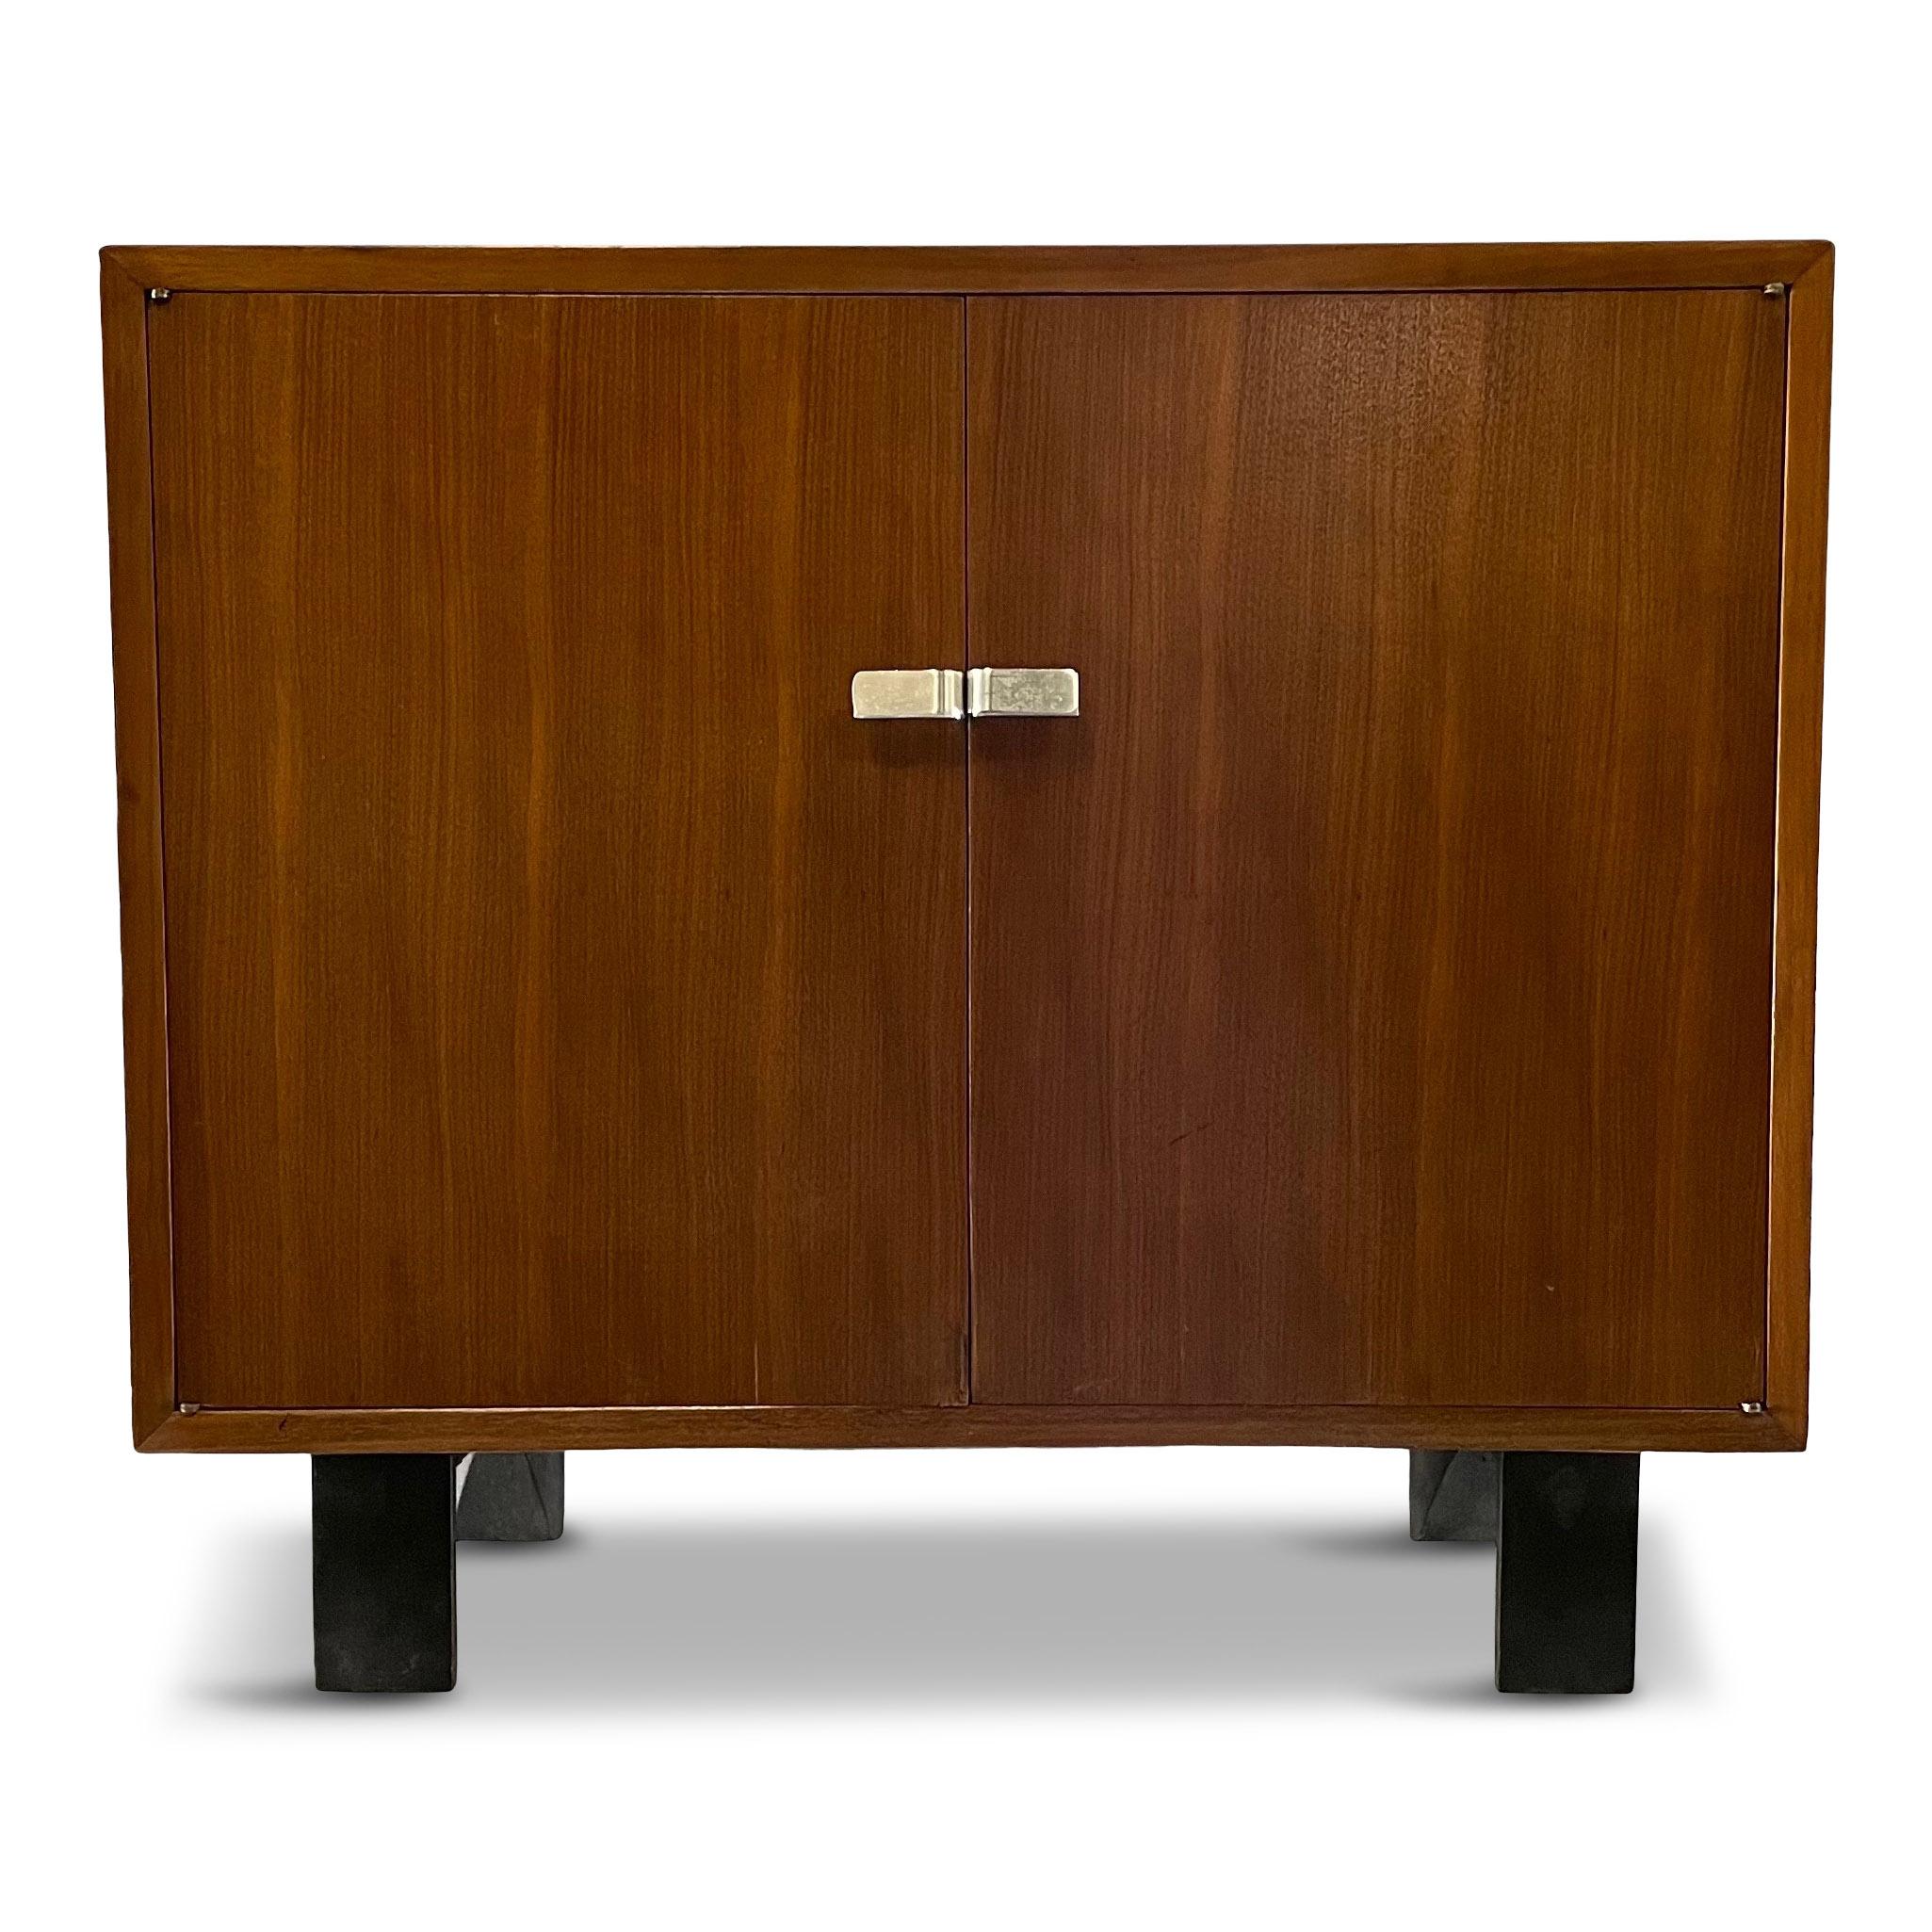 Very early cabinet designed by George Nelson for Herman Miller. This cabinet has unusual silver pulls.